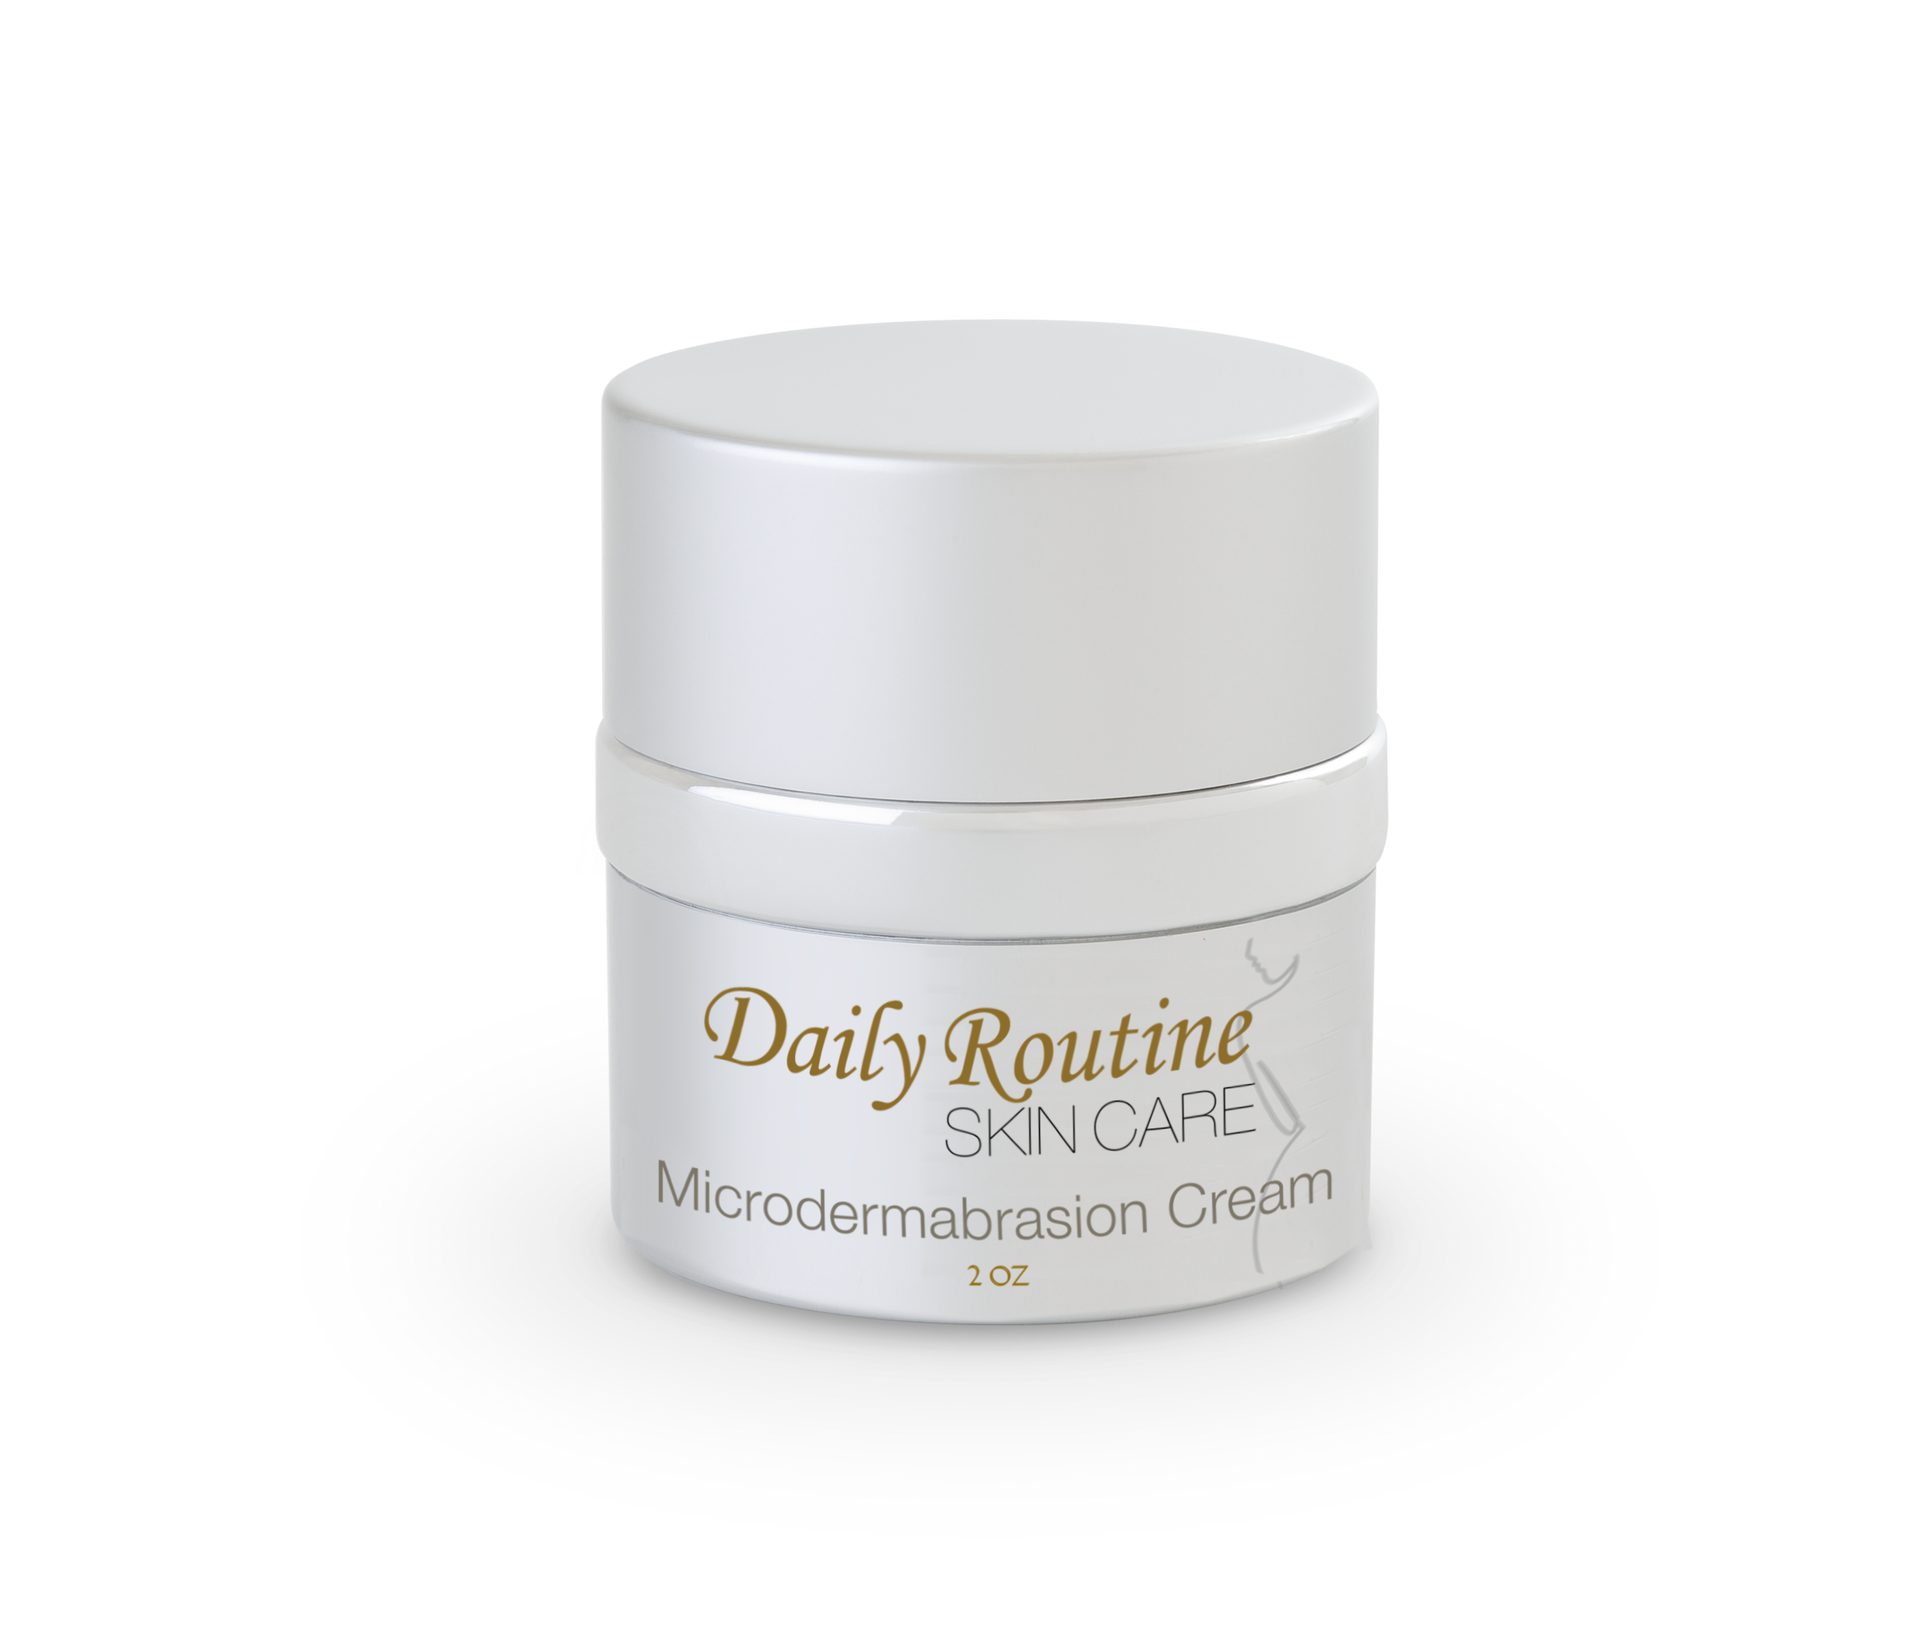 jar of microdermabrasion cream by Daily Routine Skin Care